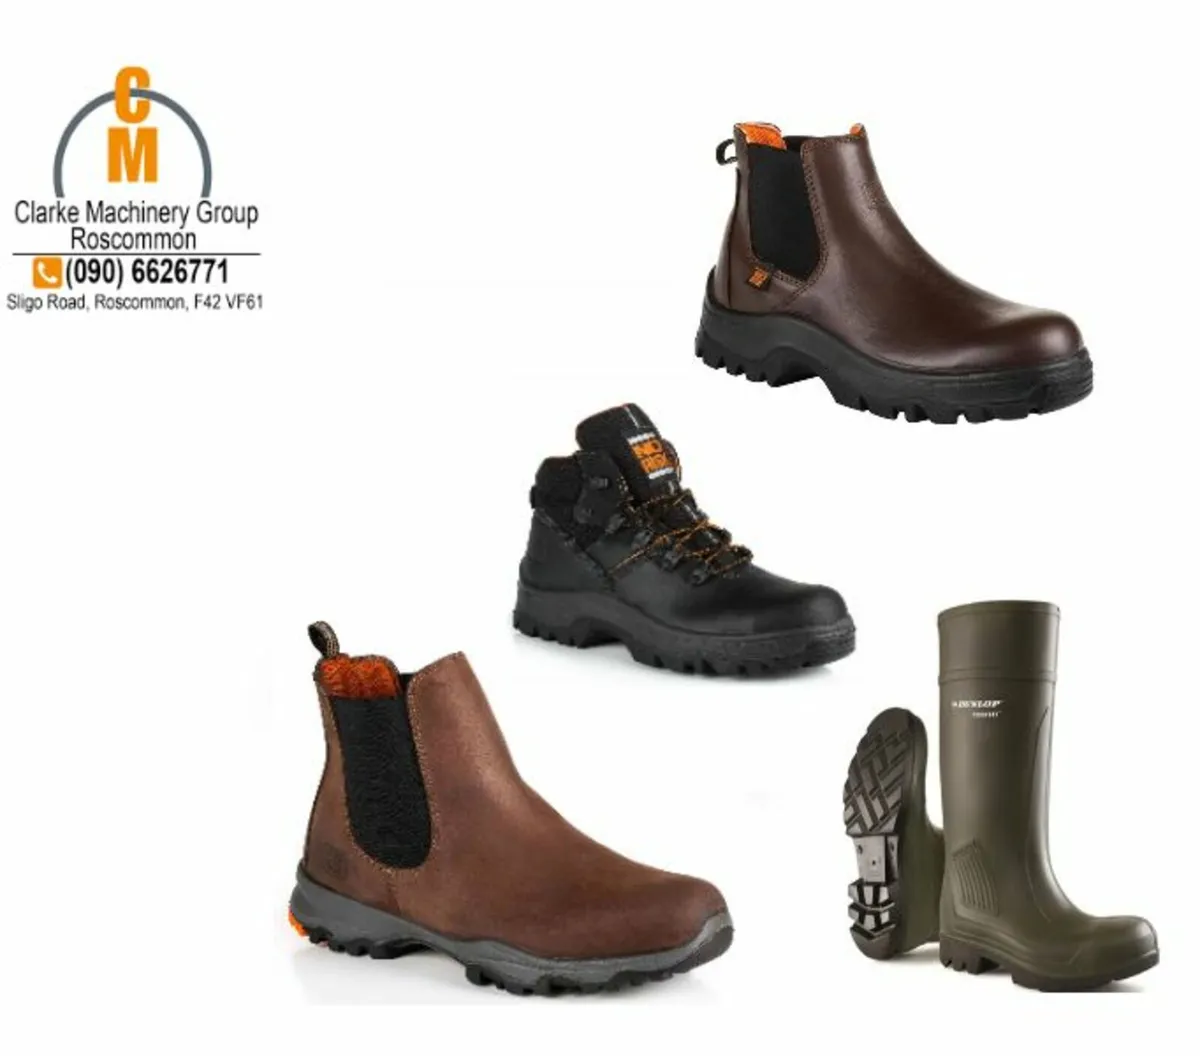 Wellies and Boots in Stock!!!